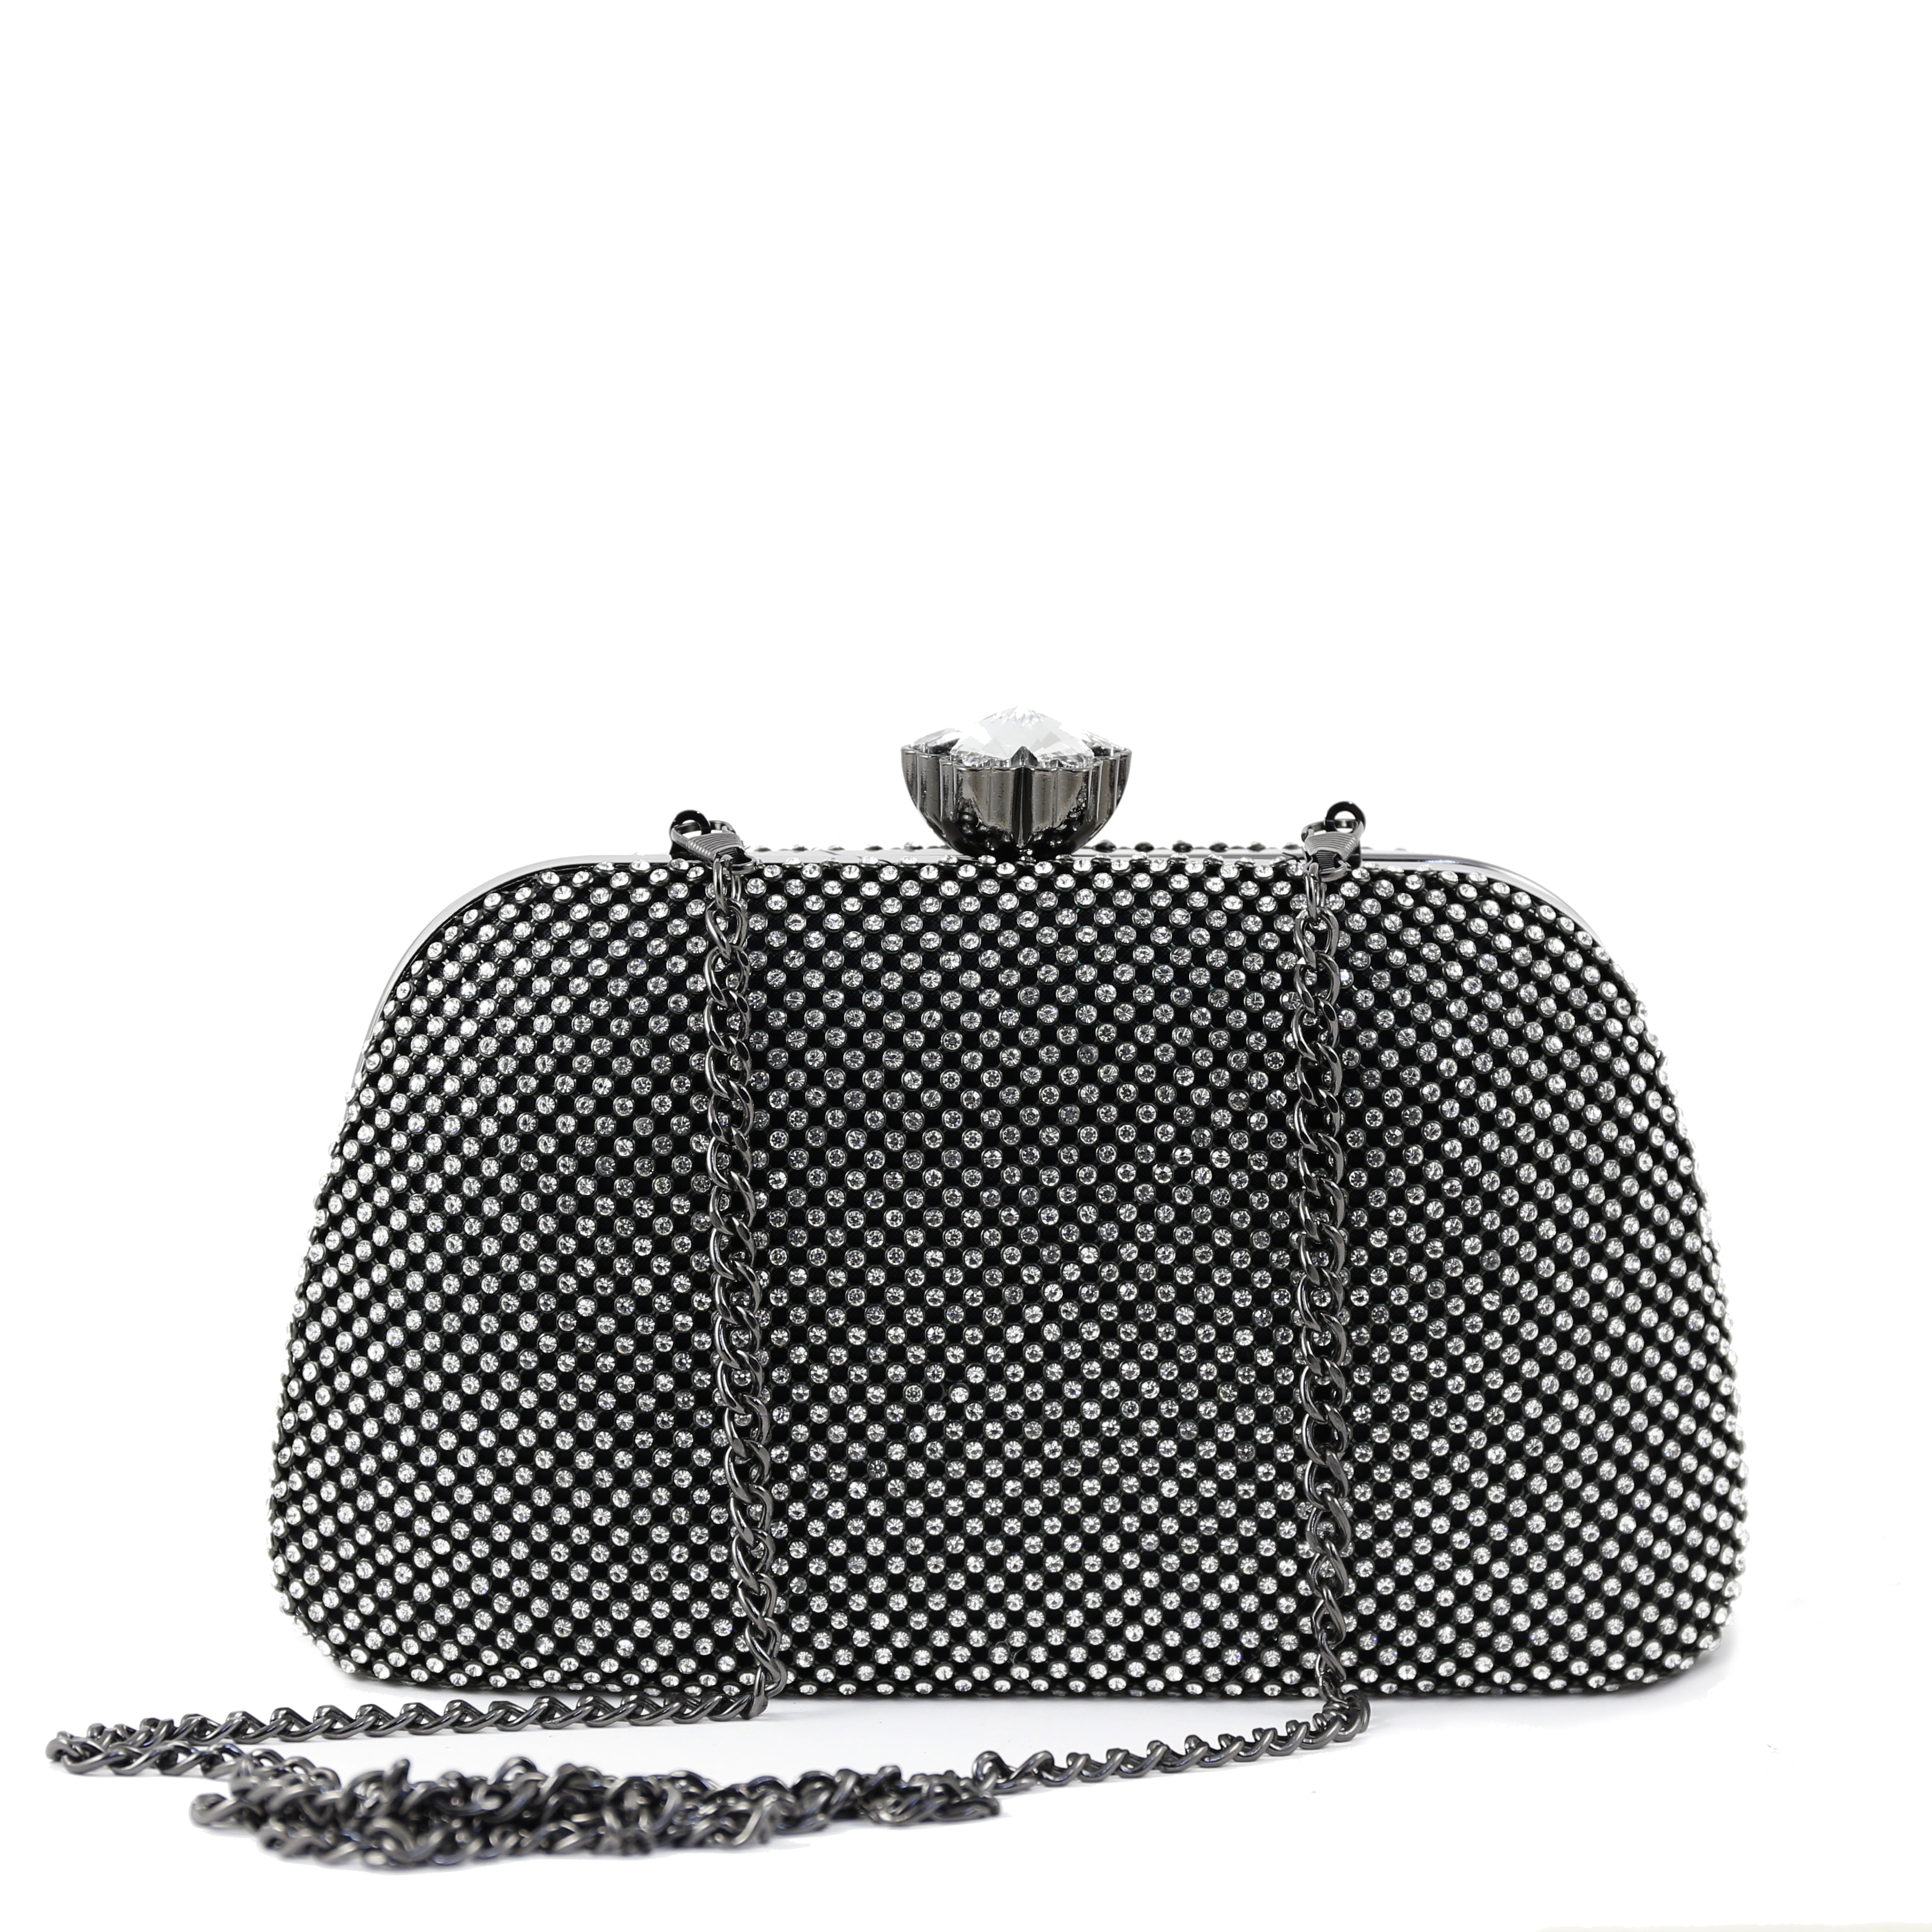 Woman Bags Clutch & Evening Bag Clutch with strass